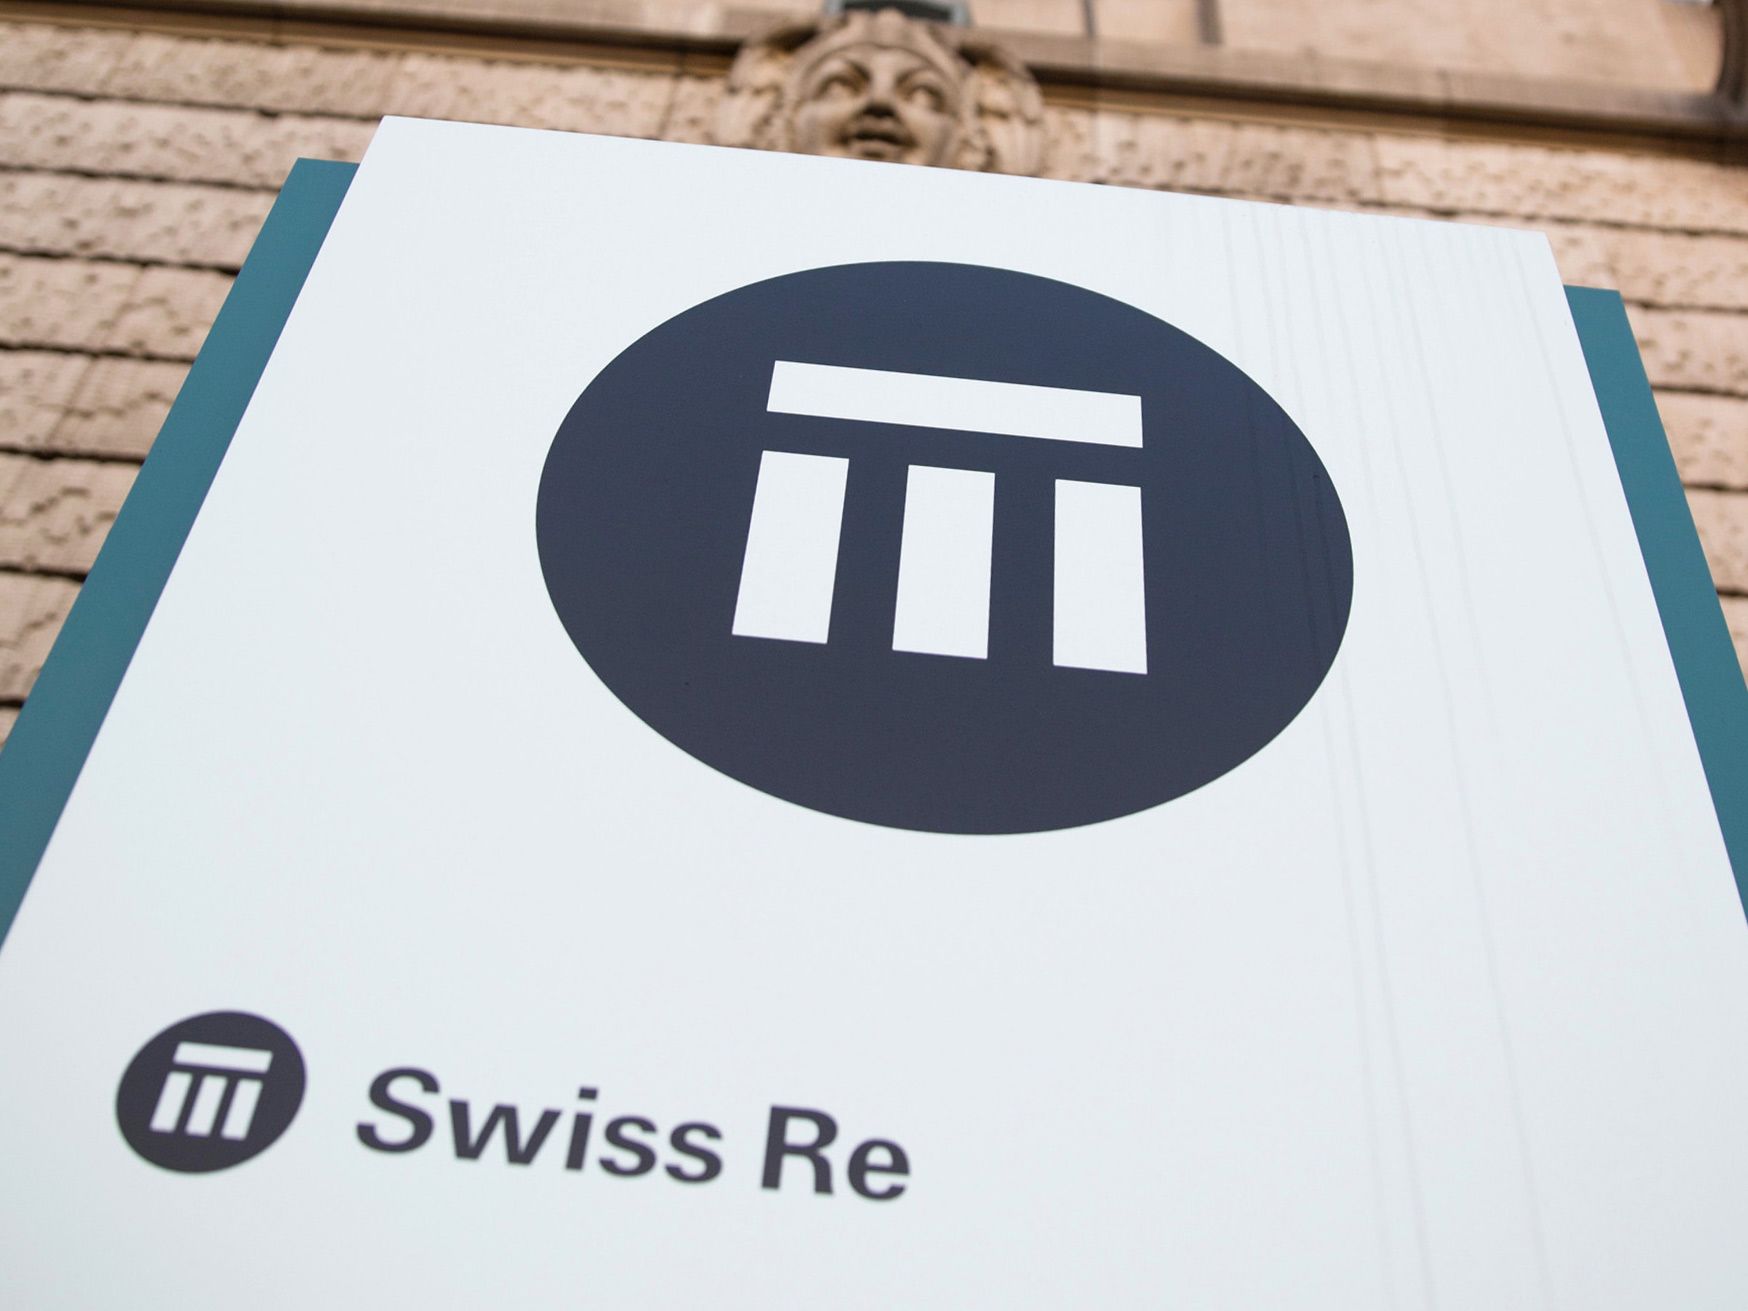 Ermotti Steps Down as Swiss Re Chair on April 30; de Vaucleroy Takes Interim Role